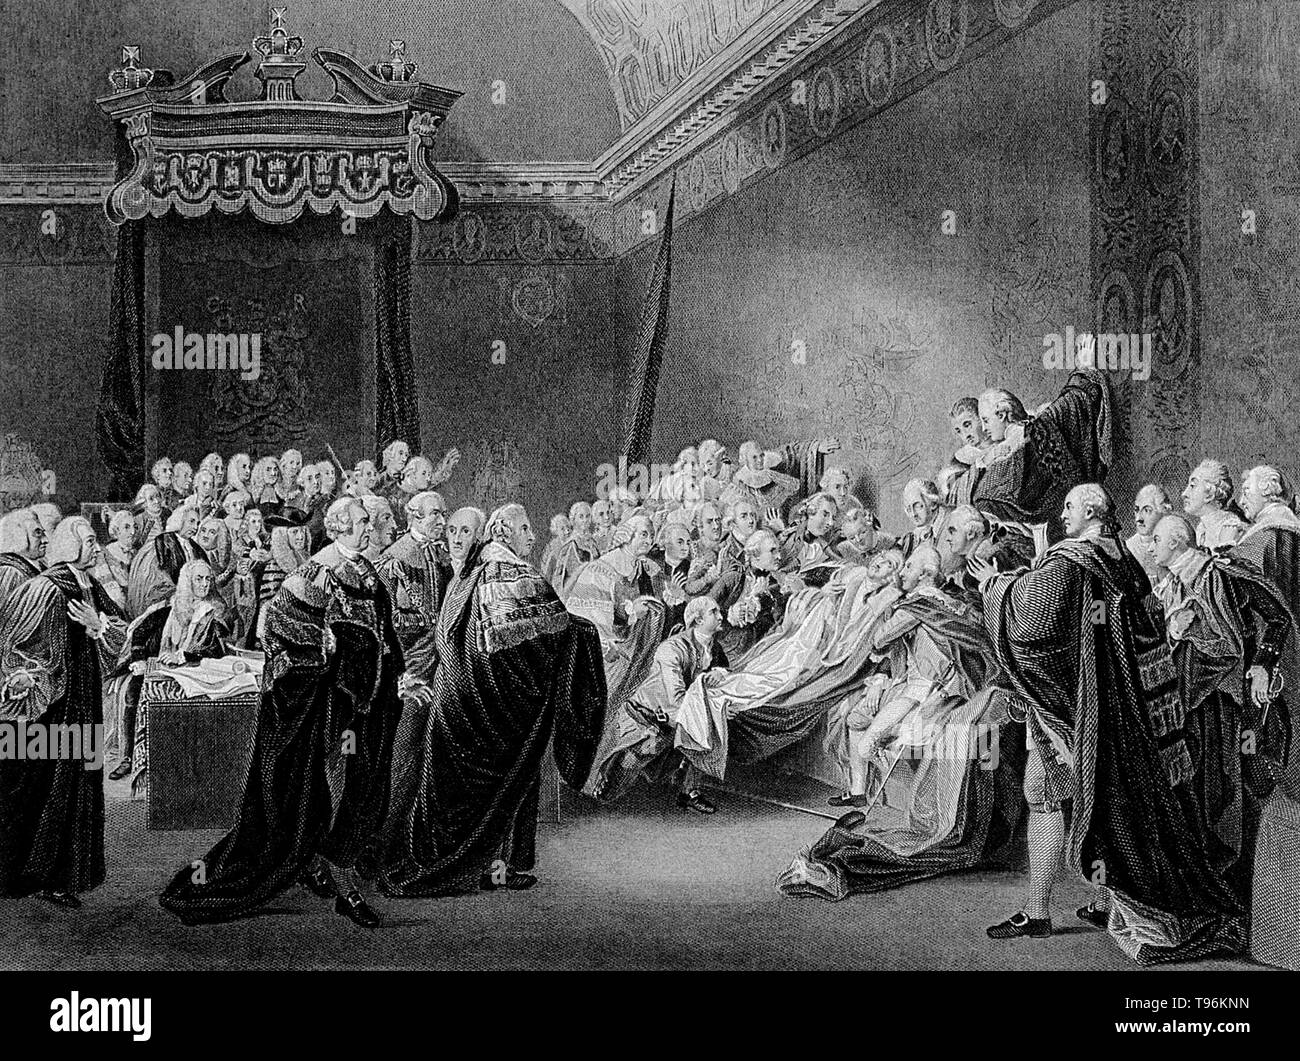 The death of William Pitt, Lord Chatham, in the Upper Chamber of the Palace of Westminster, 1778.  William Pitt, 1st Earl of Chatham (November 15, 1708 - May 11, 1778) was a British statesman of the Whig party. Much of his power came from his brilliant oratory. He was out of power for most of his career and became well known for his attacks on the government. Stock Photo